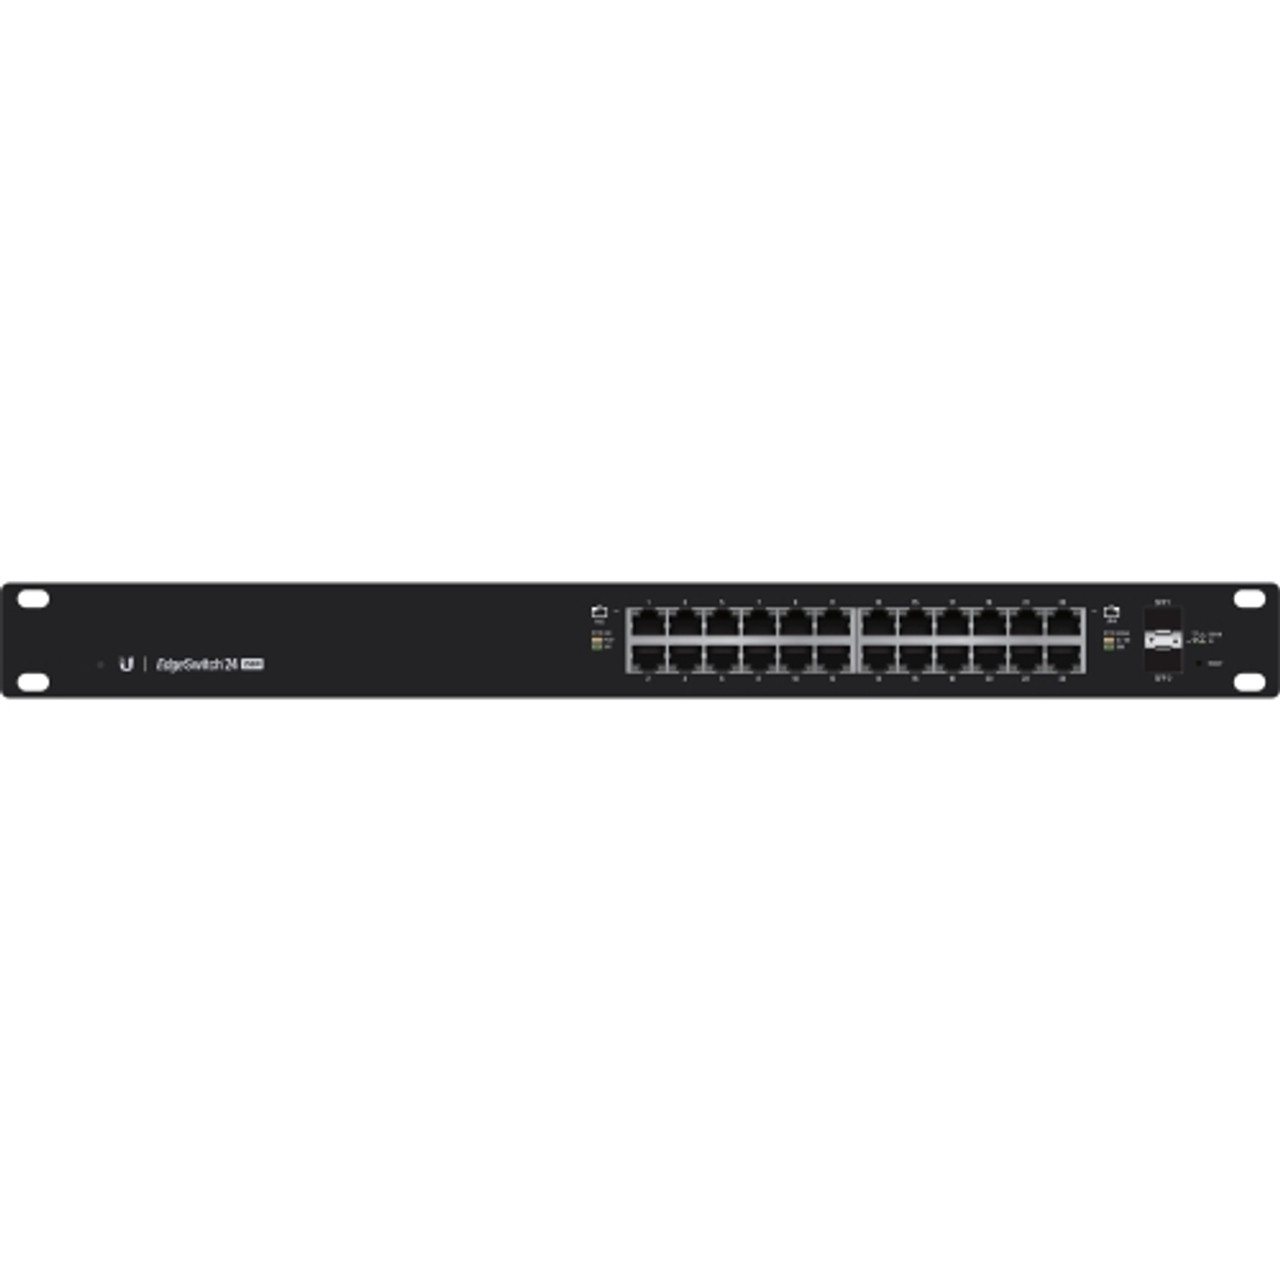 ES-24-250W Ubiquiti Networks EdgeSwitch 24-Ports SFP Layer 3 Gigabit Ethernet Switch Manageable 3 Layer Supported 1U High Desktop Rack-mountable (Refurbished)